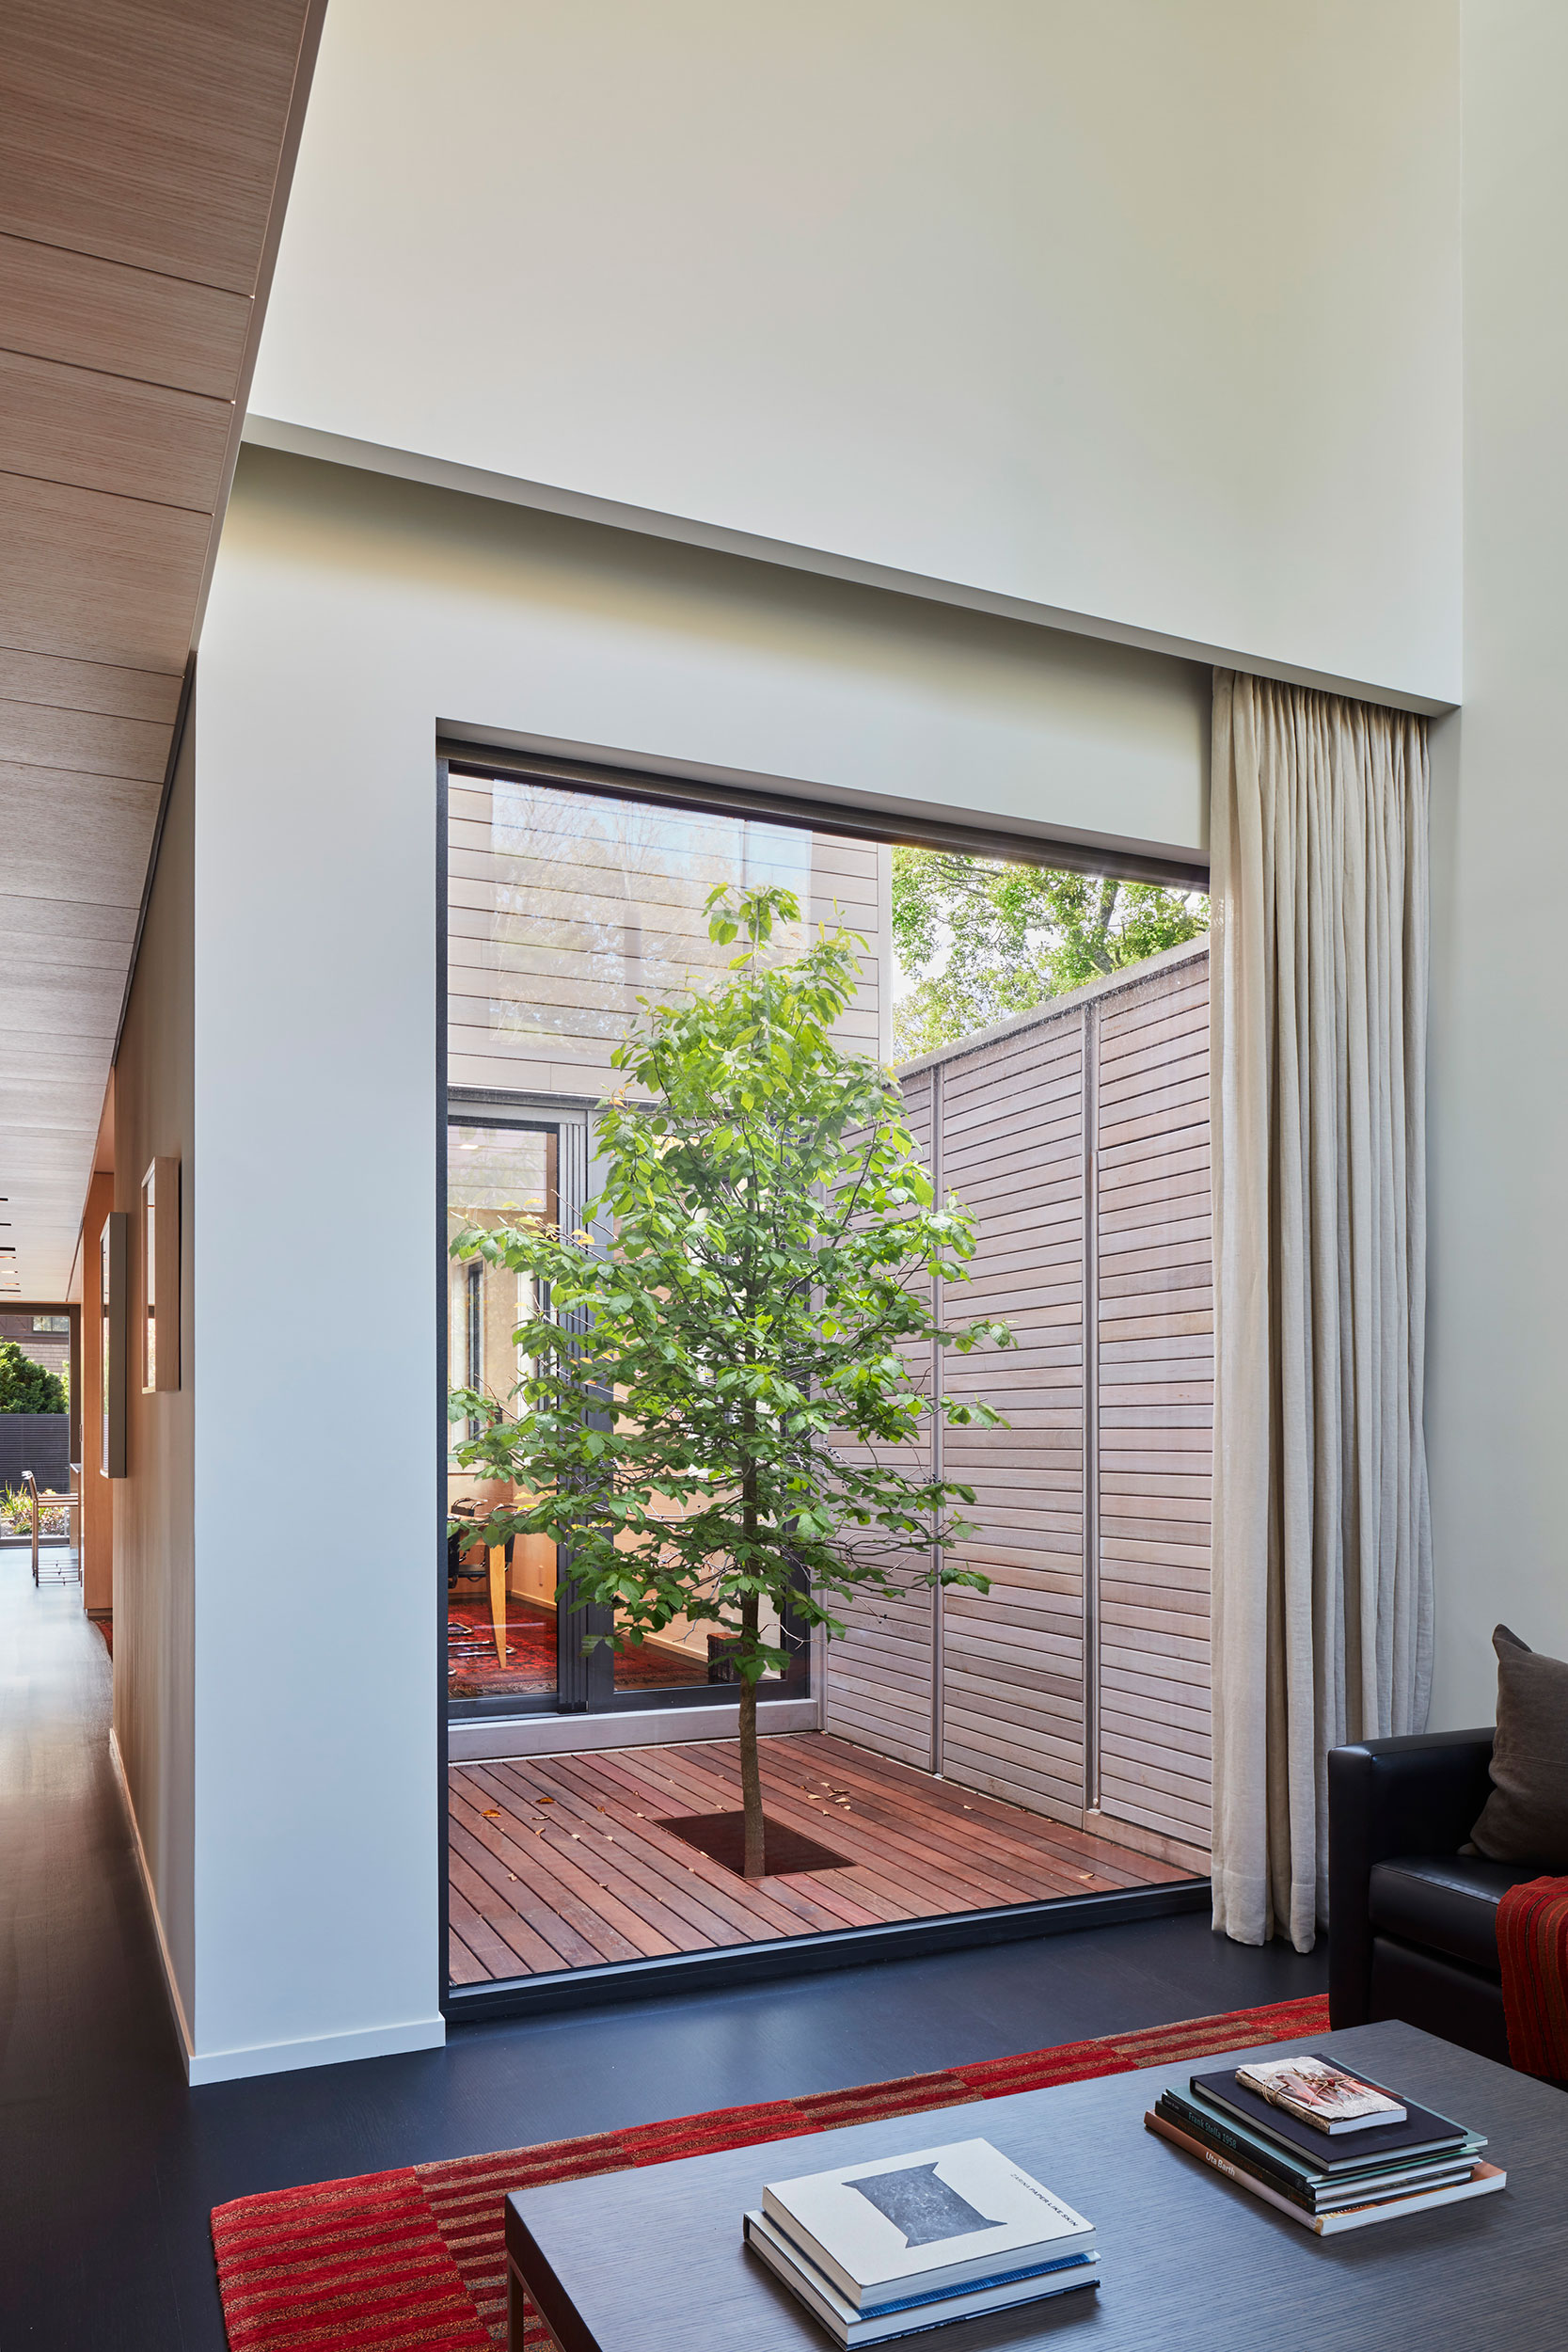 Courtyard House by Anmahian Winton Architects, in Cambridge, MA. Photo: Jane Messinger.